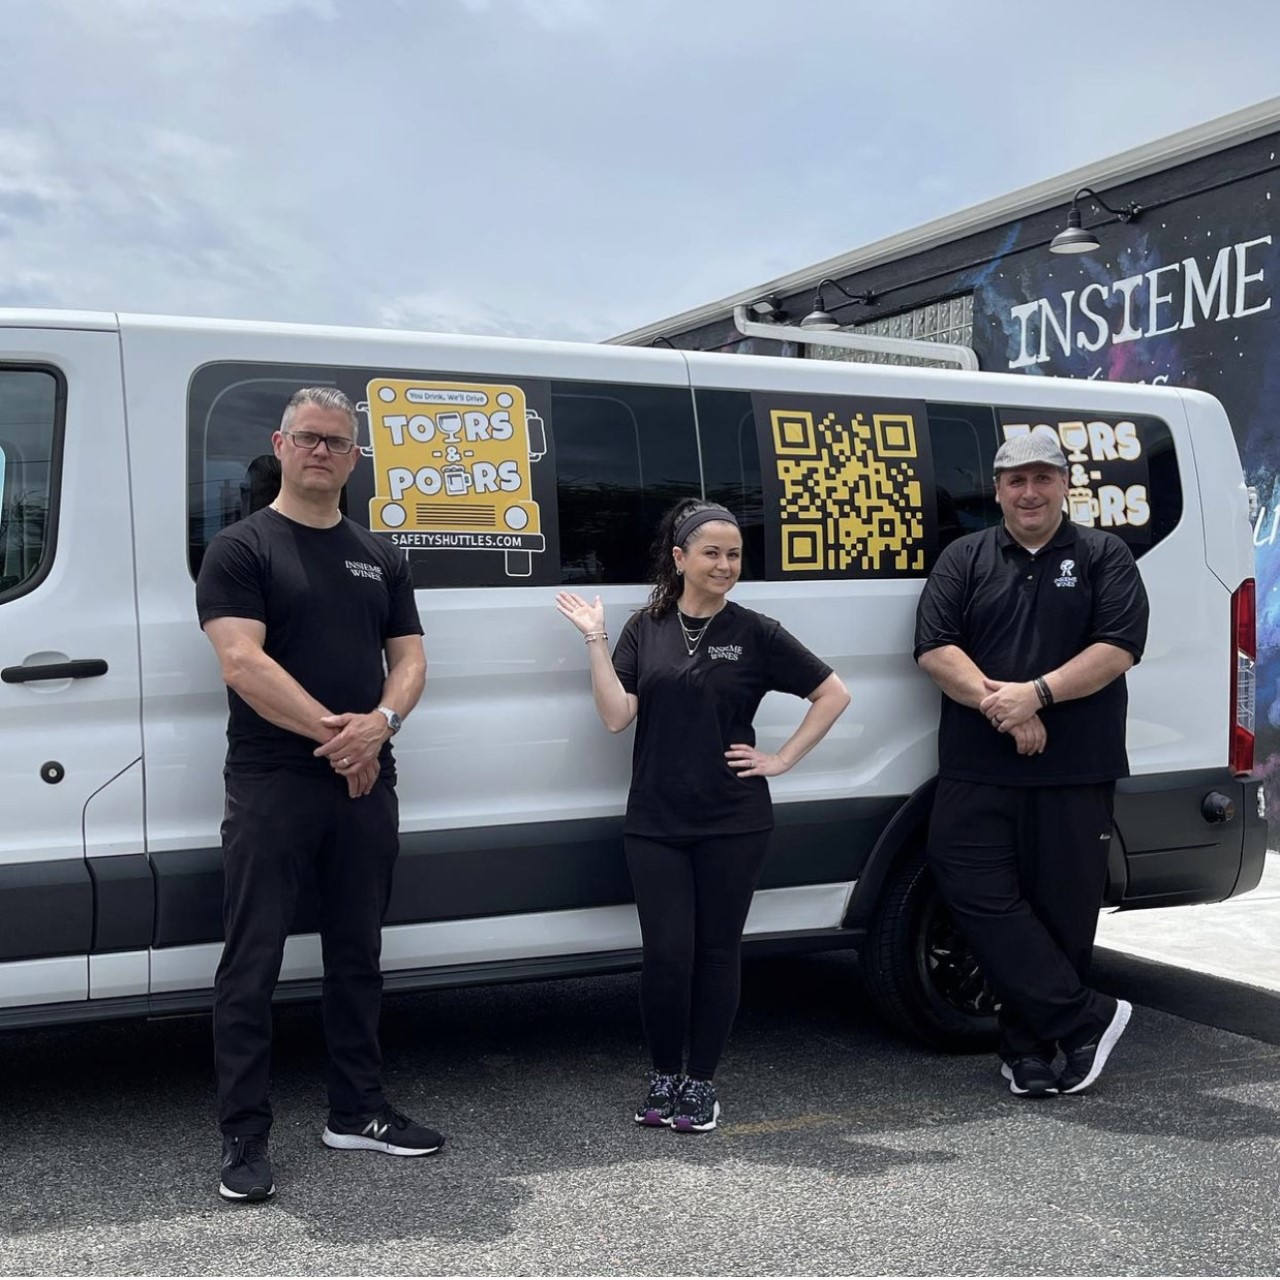 Safety Shuttles stops at breweries, winery and eateries